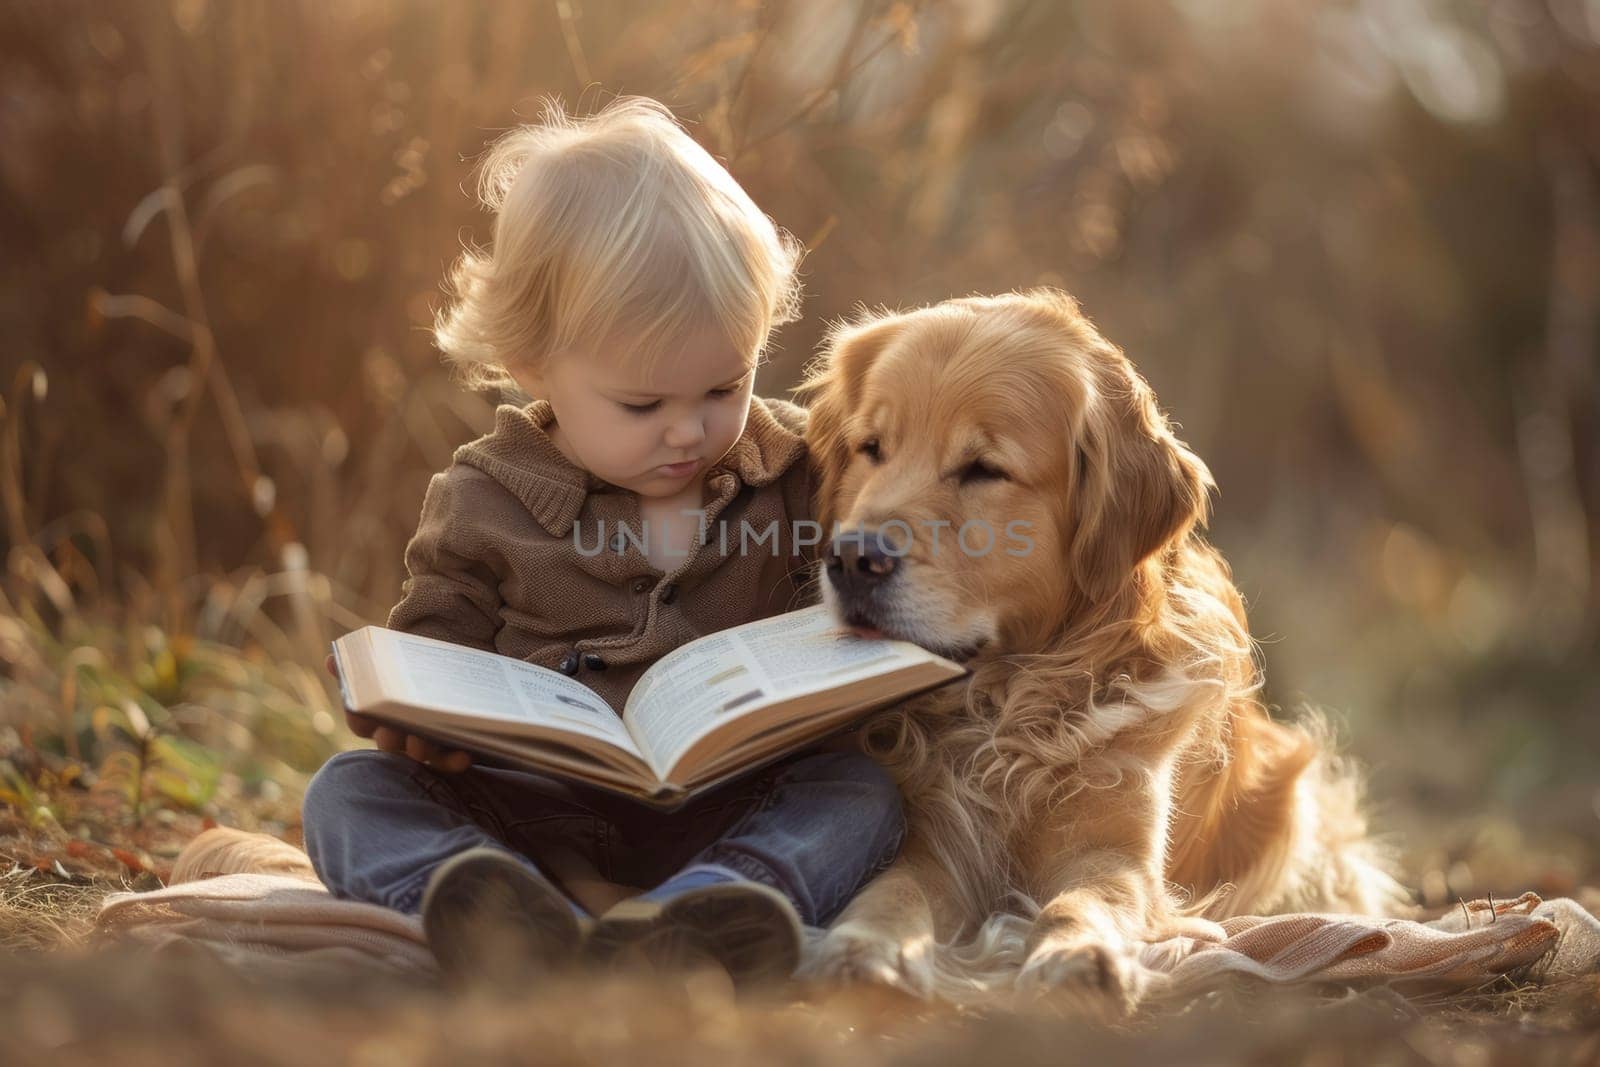 A child immersed in storytelling reads aloud to attentive dog at sunny day. The scene encapsulates a whimsical tale of childhood and animal friendship